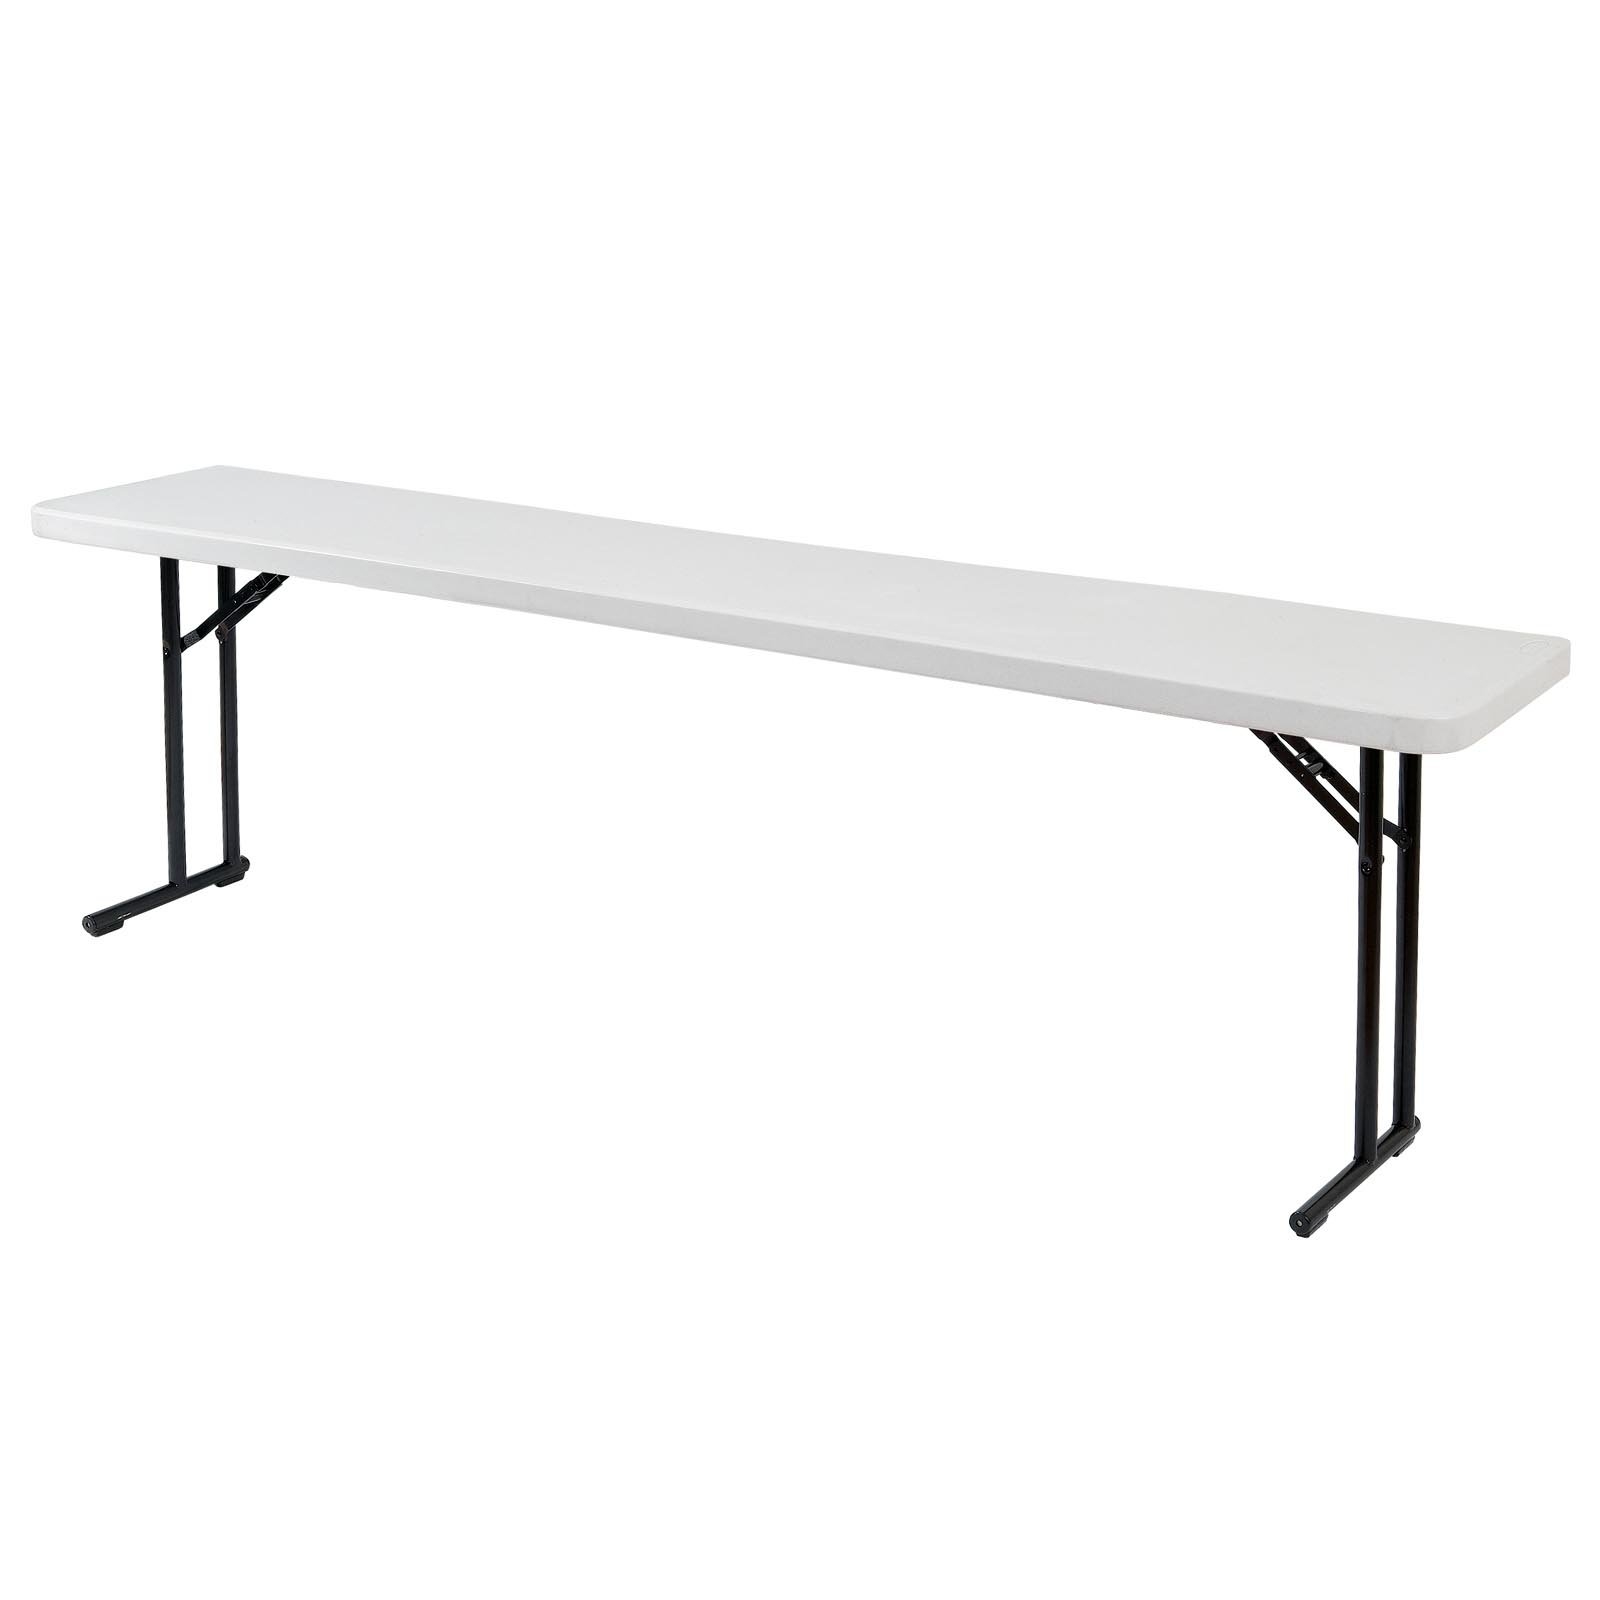 National Public Seating BT1800 Series Steel Frame Rectangular Seminar Blow Molded Plastic Top Folding Table, 700 lbs Capacity, 96" Length x 18" Width x 29-1/2" Height, Speckled Gray/Gray